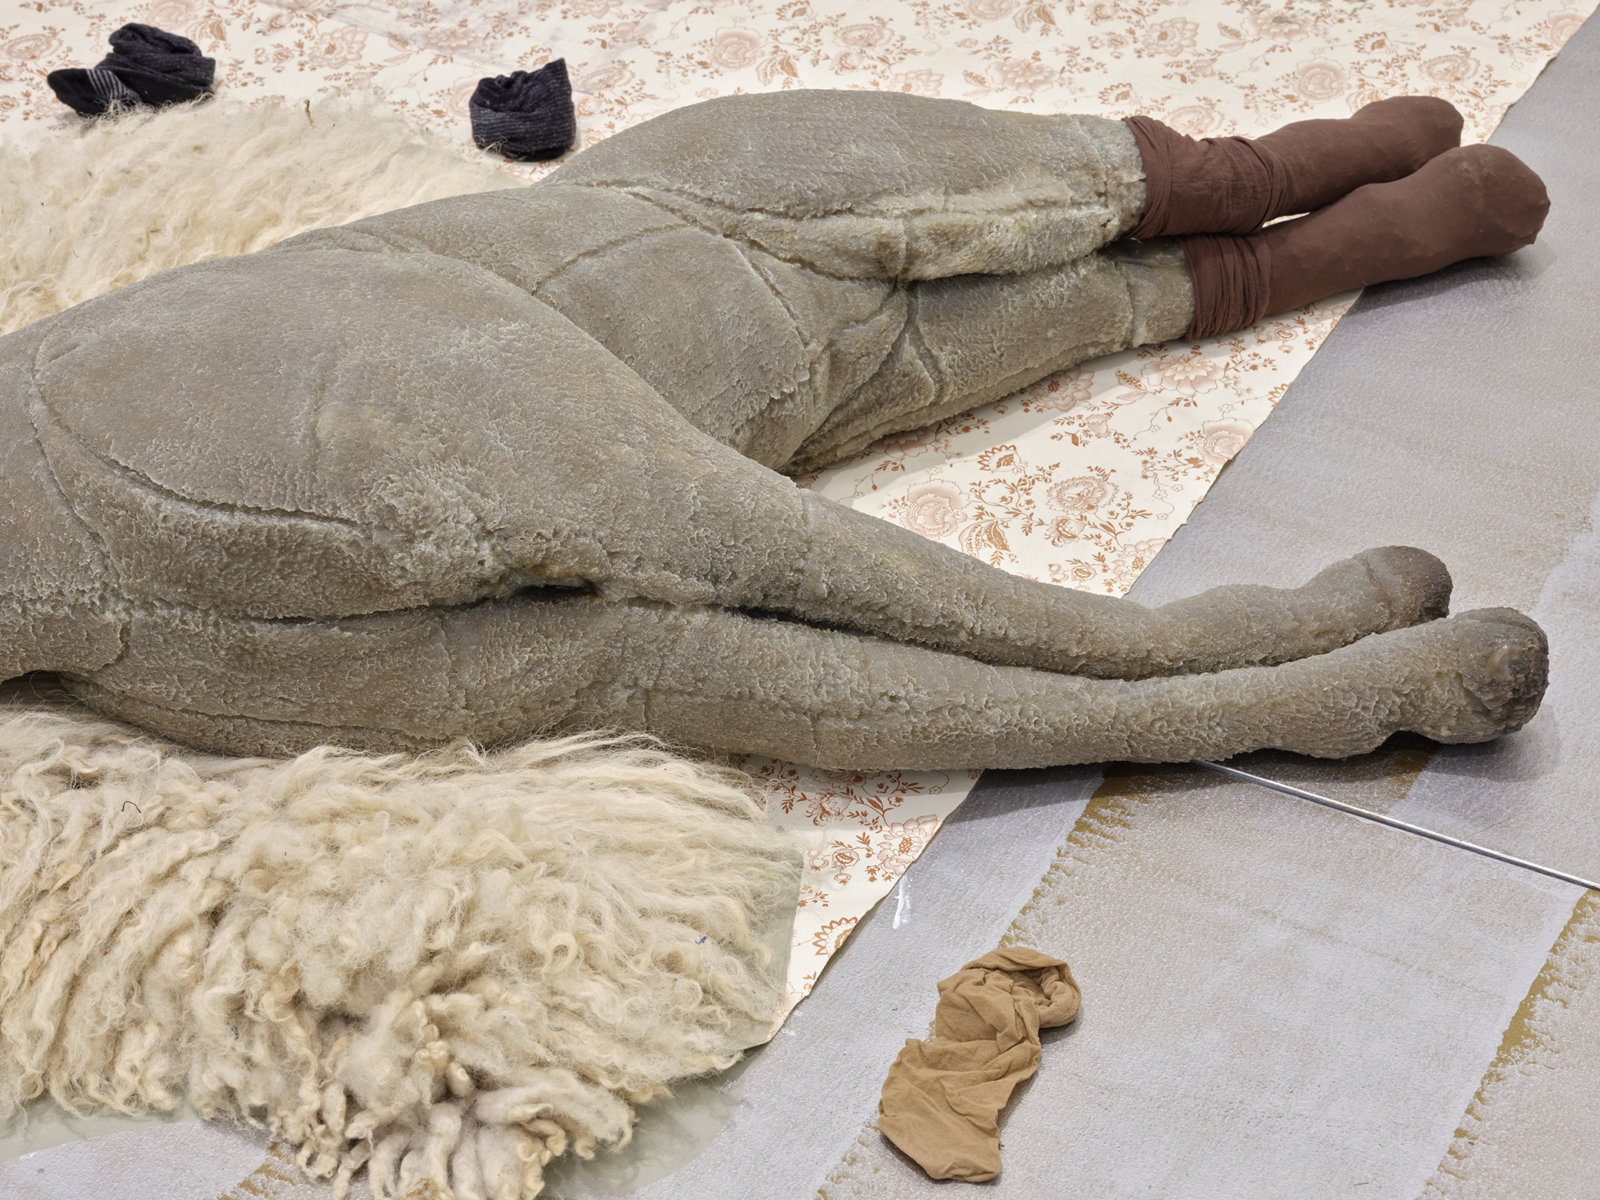 Liz Magor, Dressed (detail), 2020, painted plywood, fabric skirting, silicone rubber, hosiery, sheepskin, vinyl tablecloth, wood and ceramic crafts, plastic cup, dried lavender, packaging materials, 28 x 120 x 108 in. (71 x 305 x 274 cm)